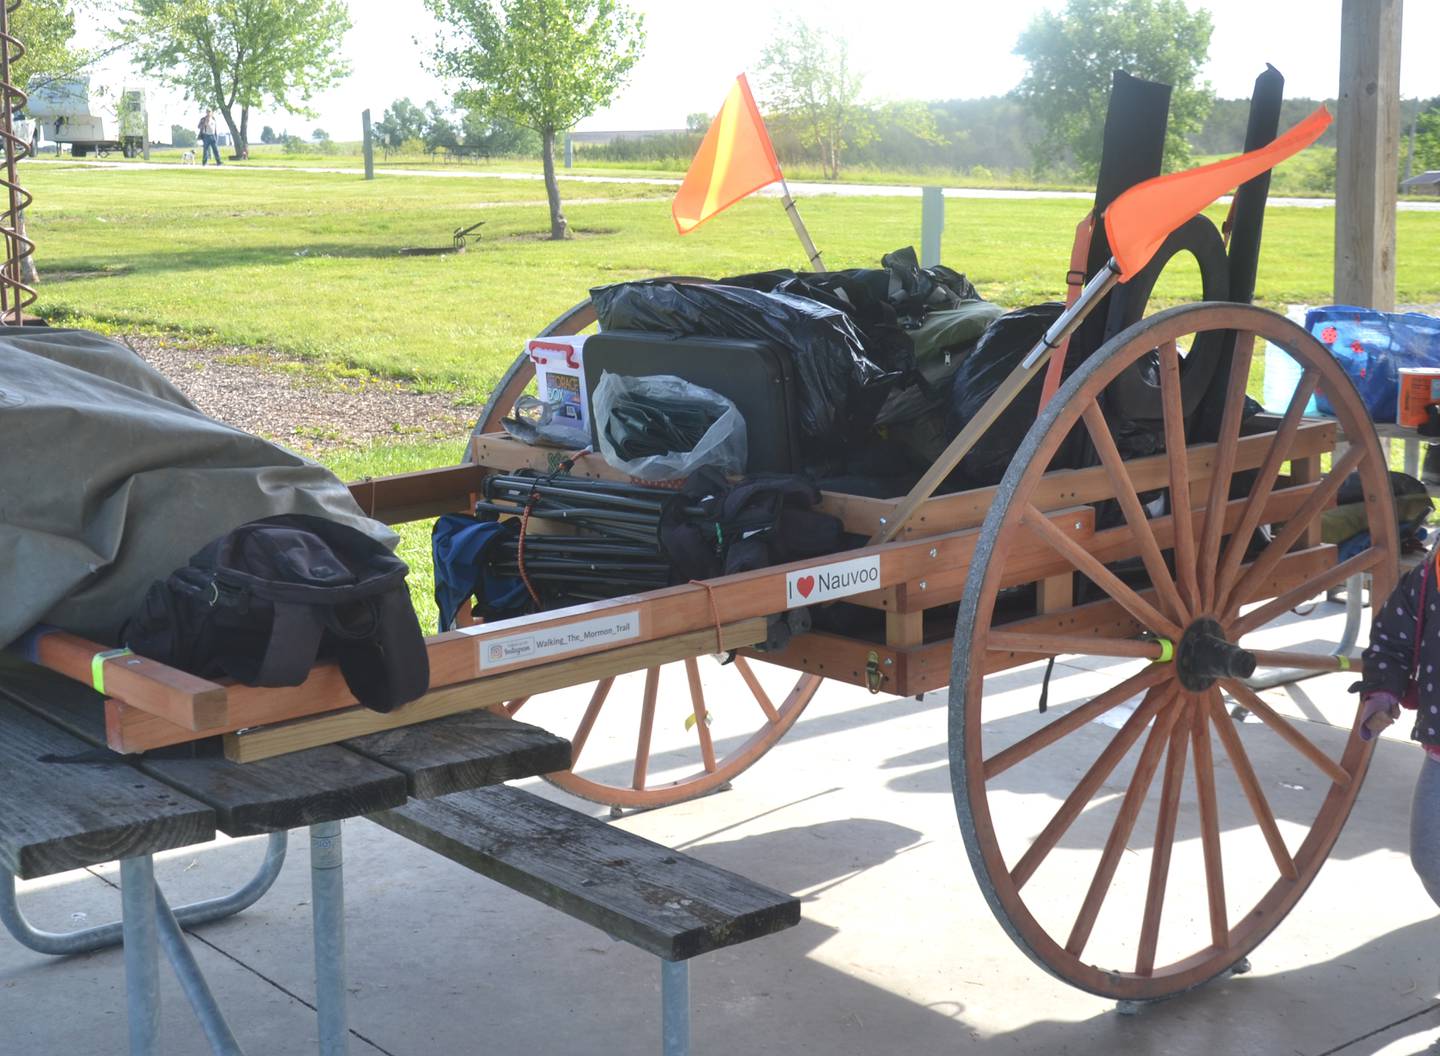 The Johns have pulled the hand cart with them since Nauvoo, carrying all their necessities for the trip West.